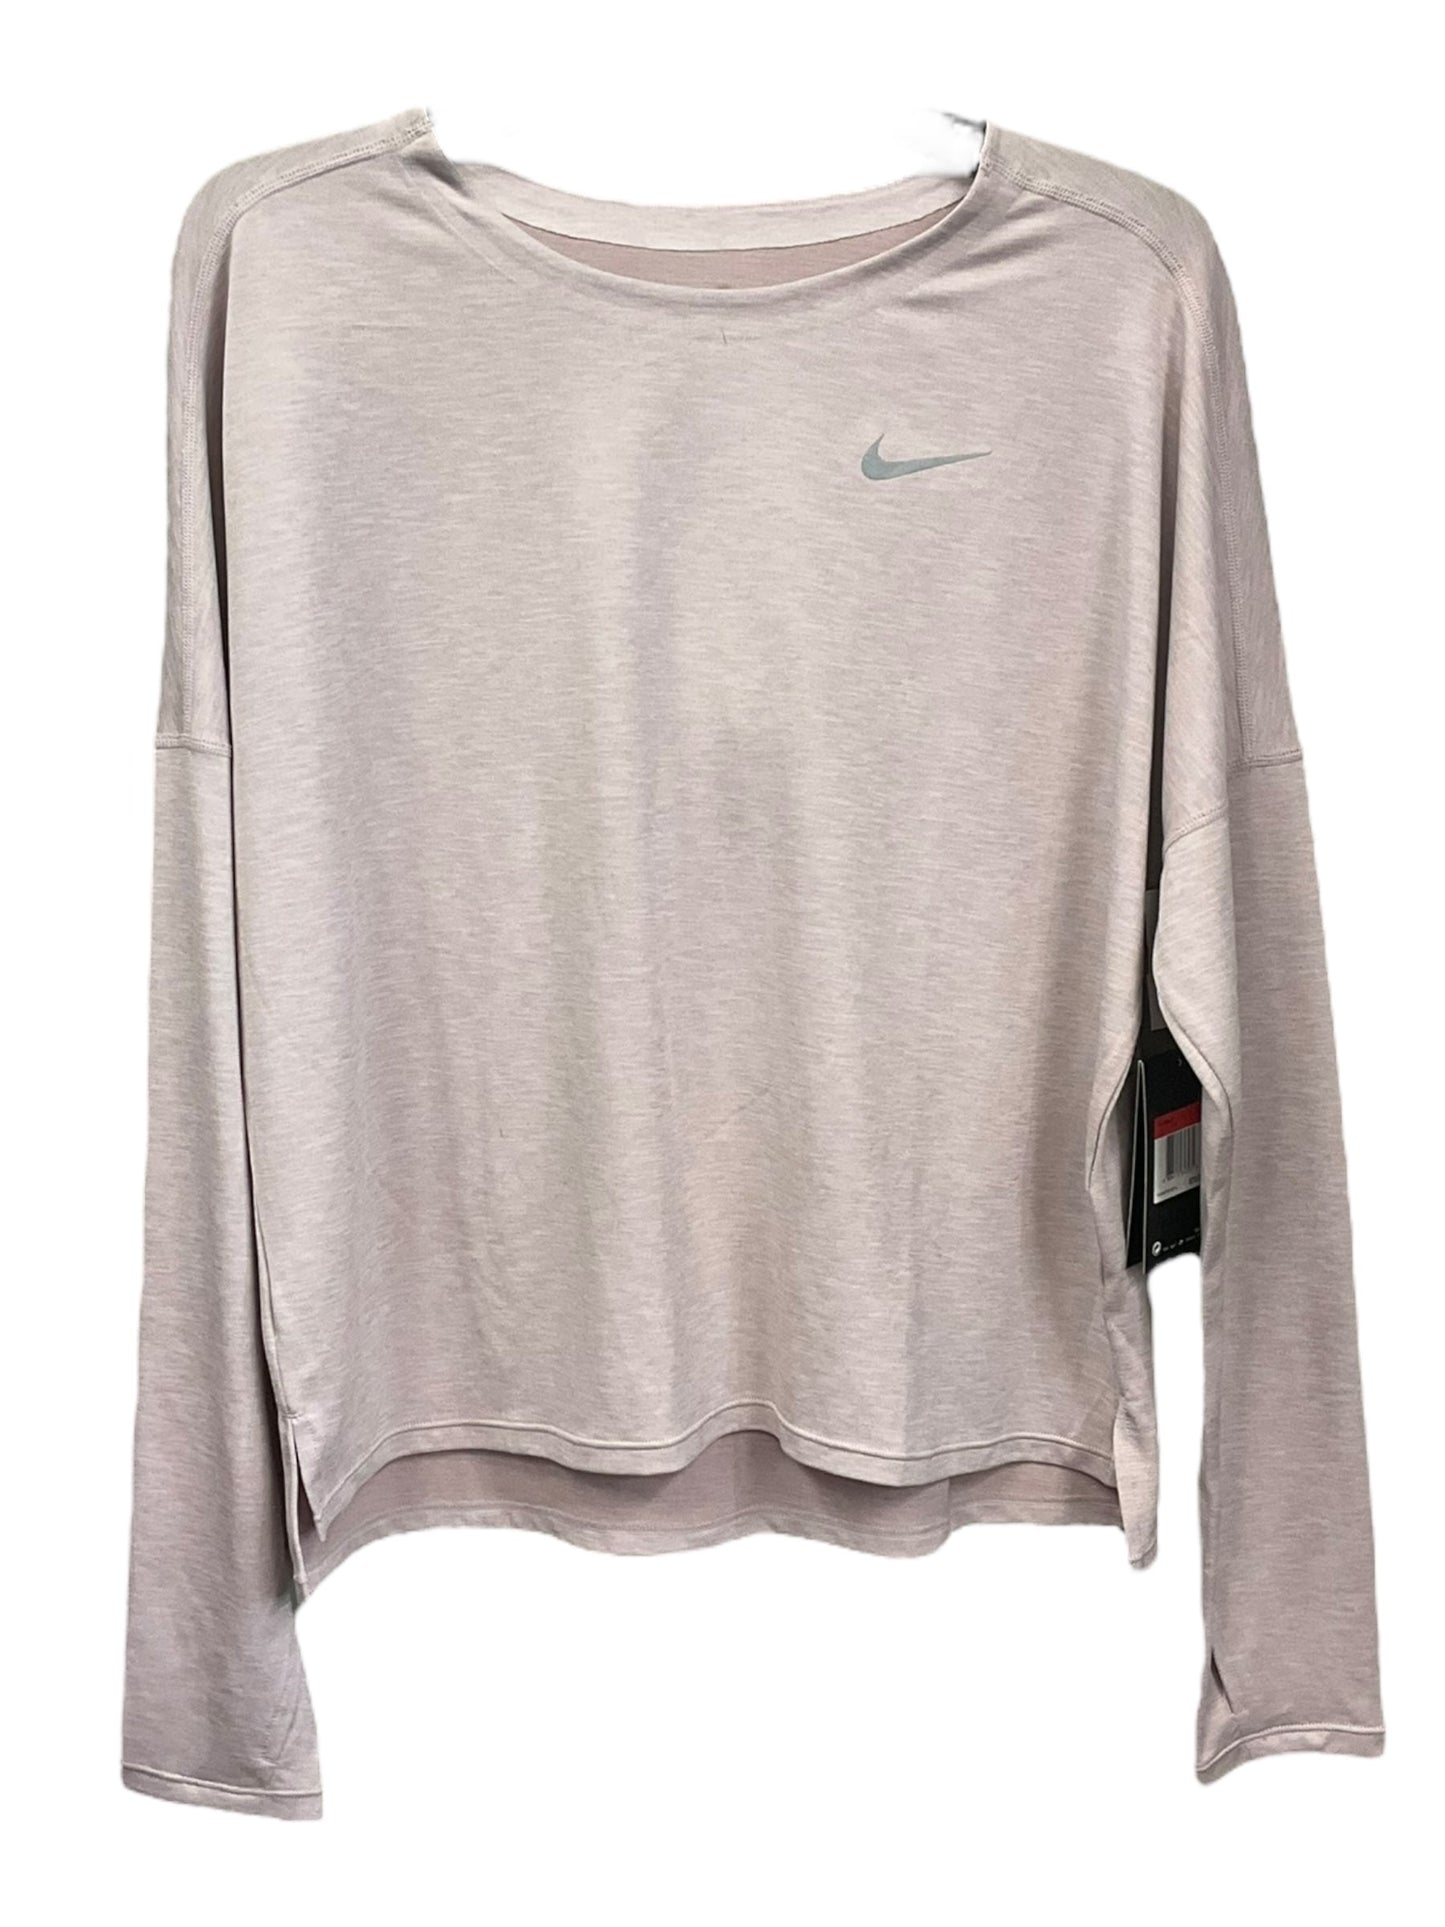 Pink Athletic Top Long Sleeve Crewneck Nike Apparel, Size L